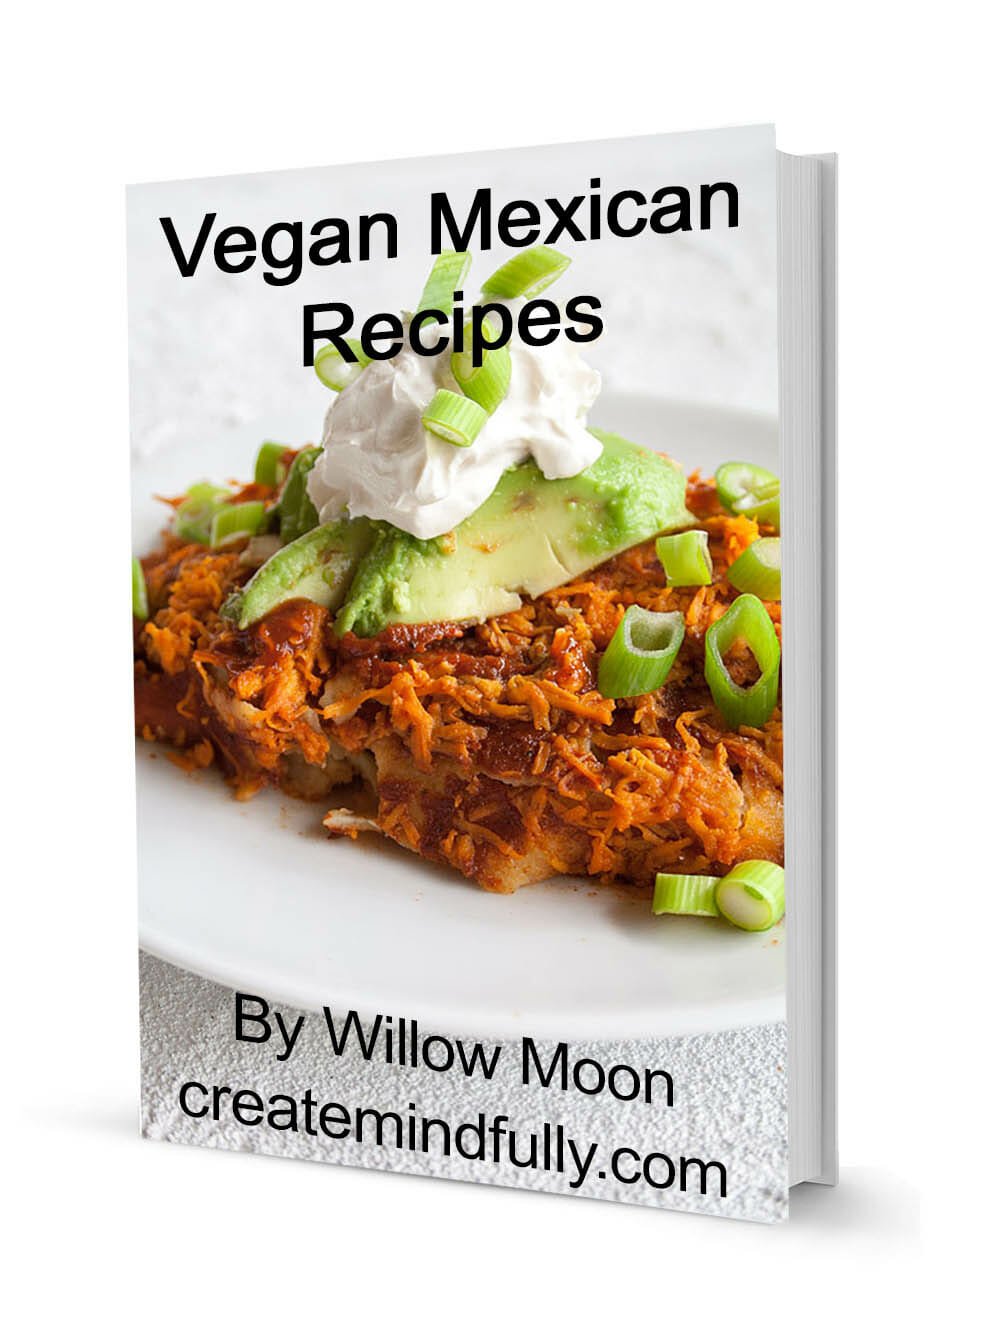 Vegan Mexican Recipes ebook cover with text.